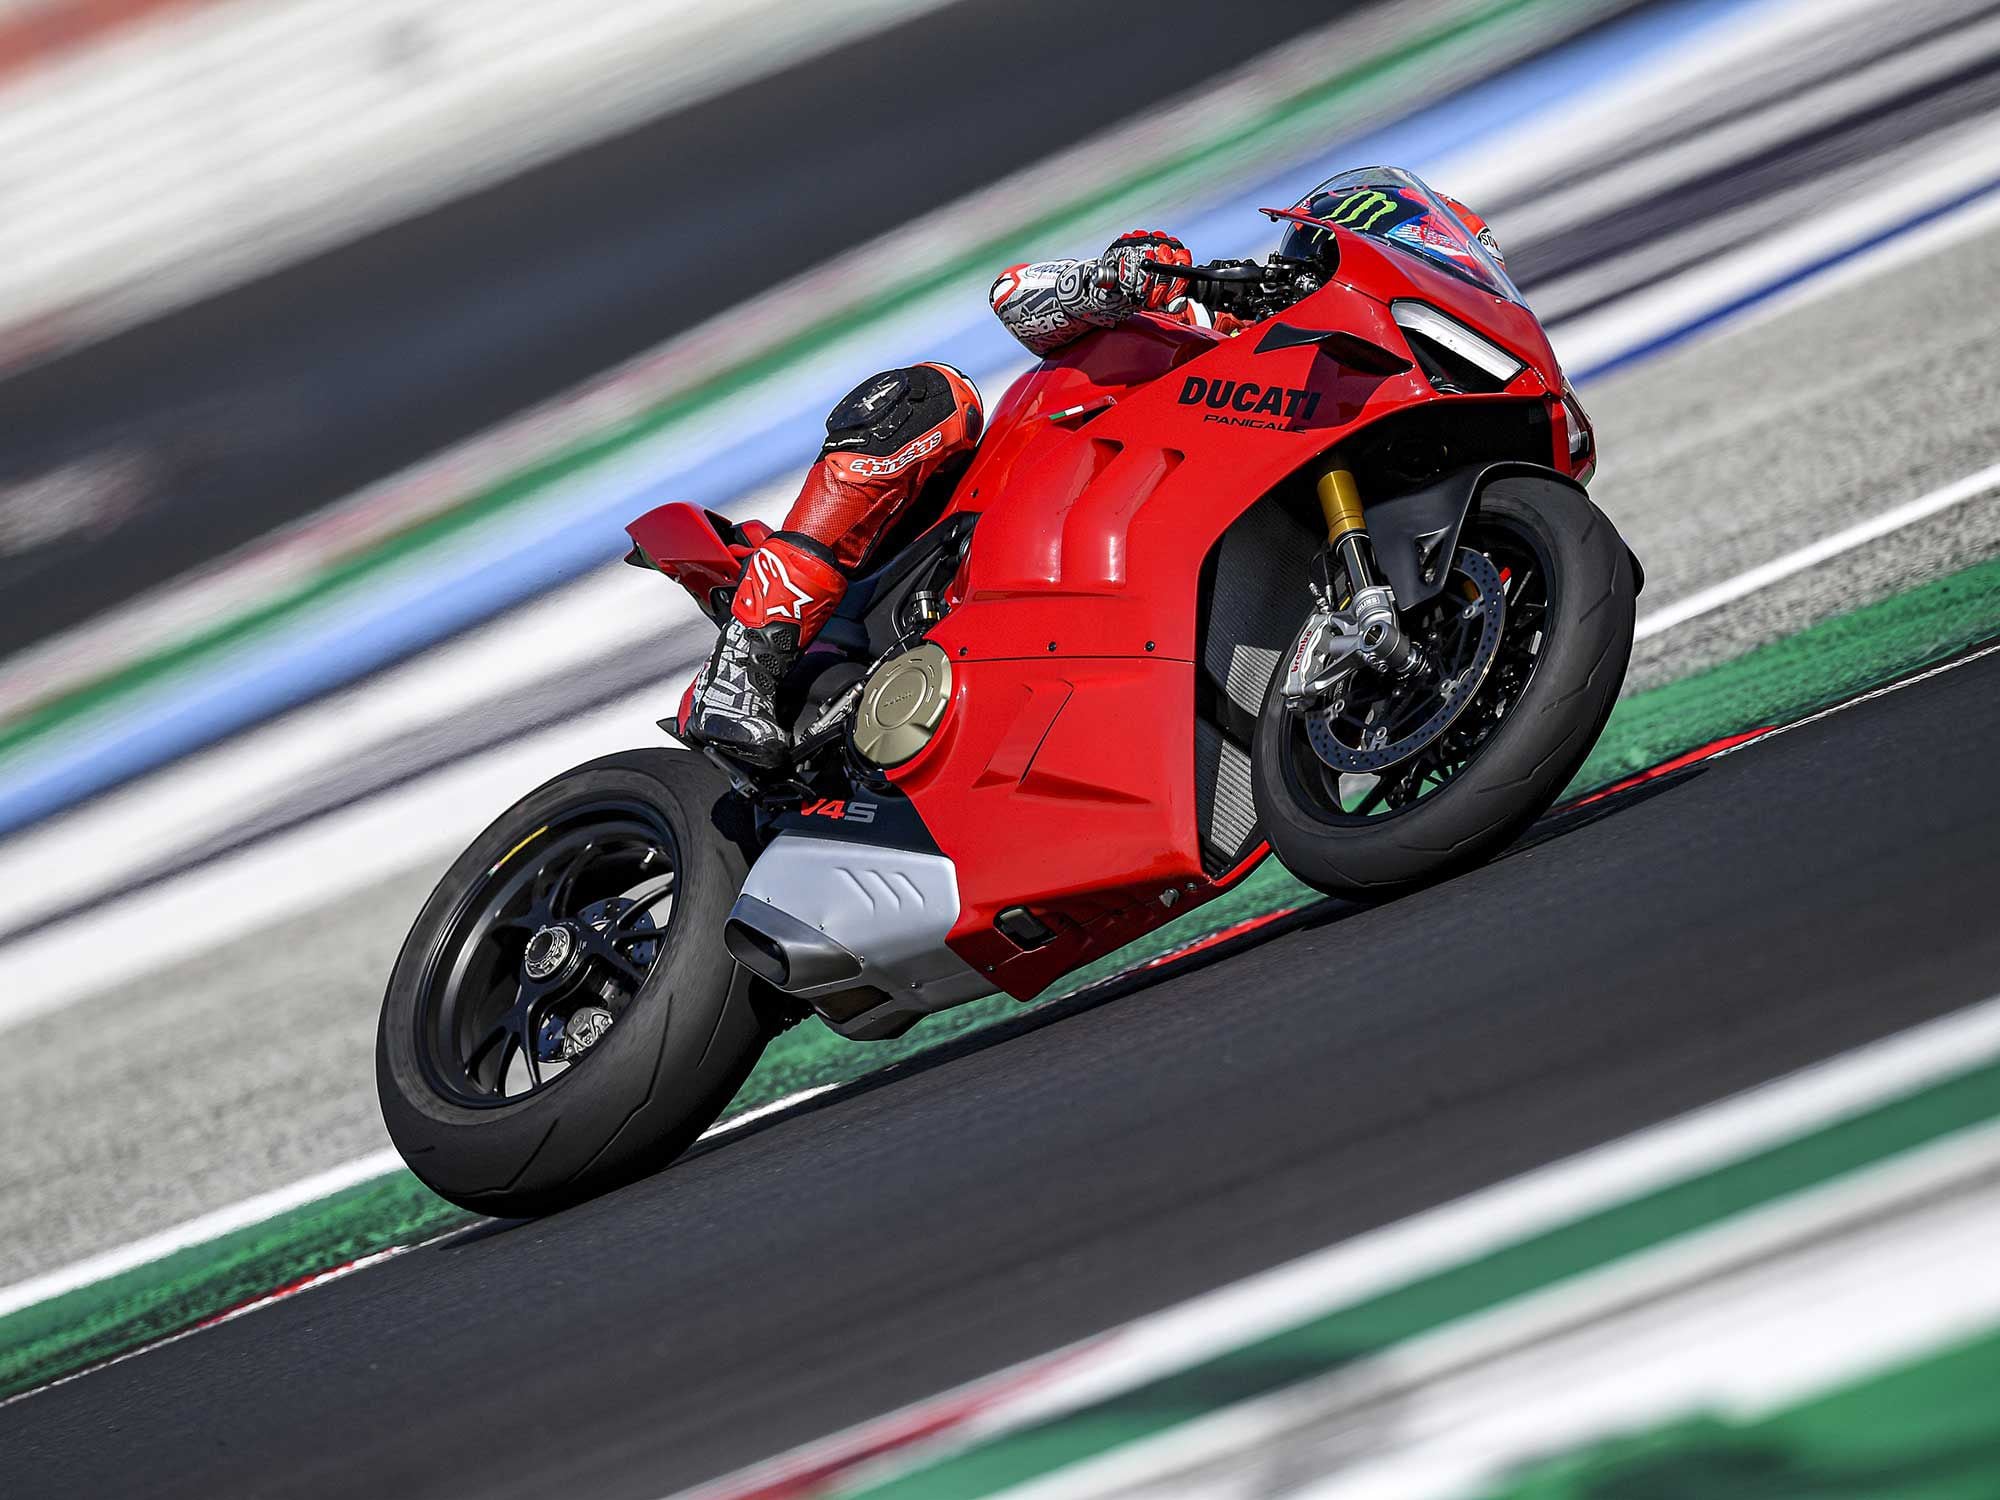 The Panigale V4 and V4 S feature a whole host of bodywork vents for better airflow, including venting in the bottom of the fairing bellypan.